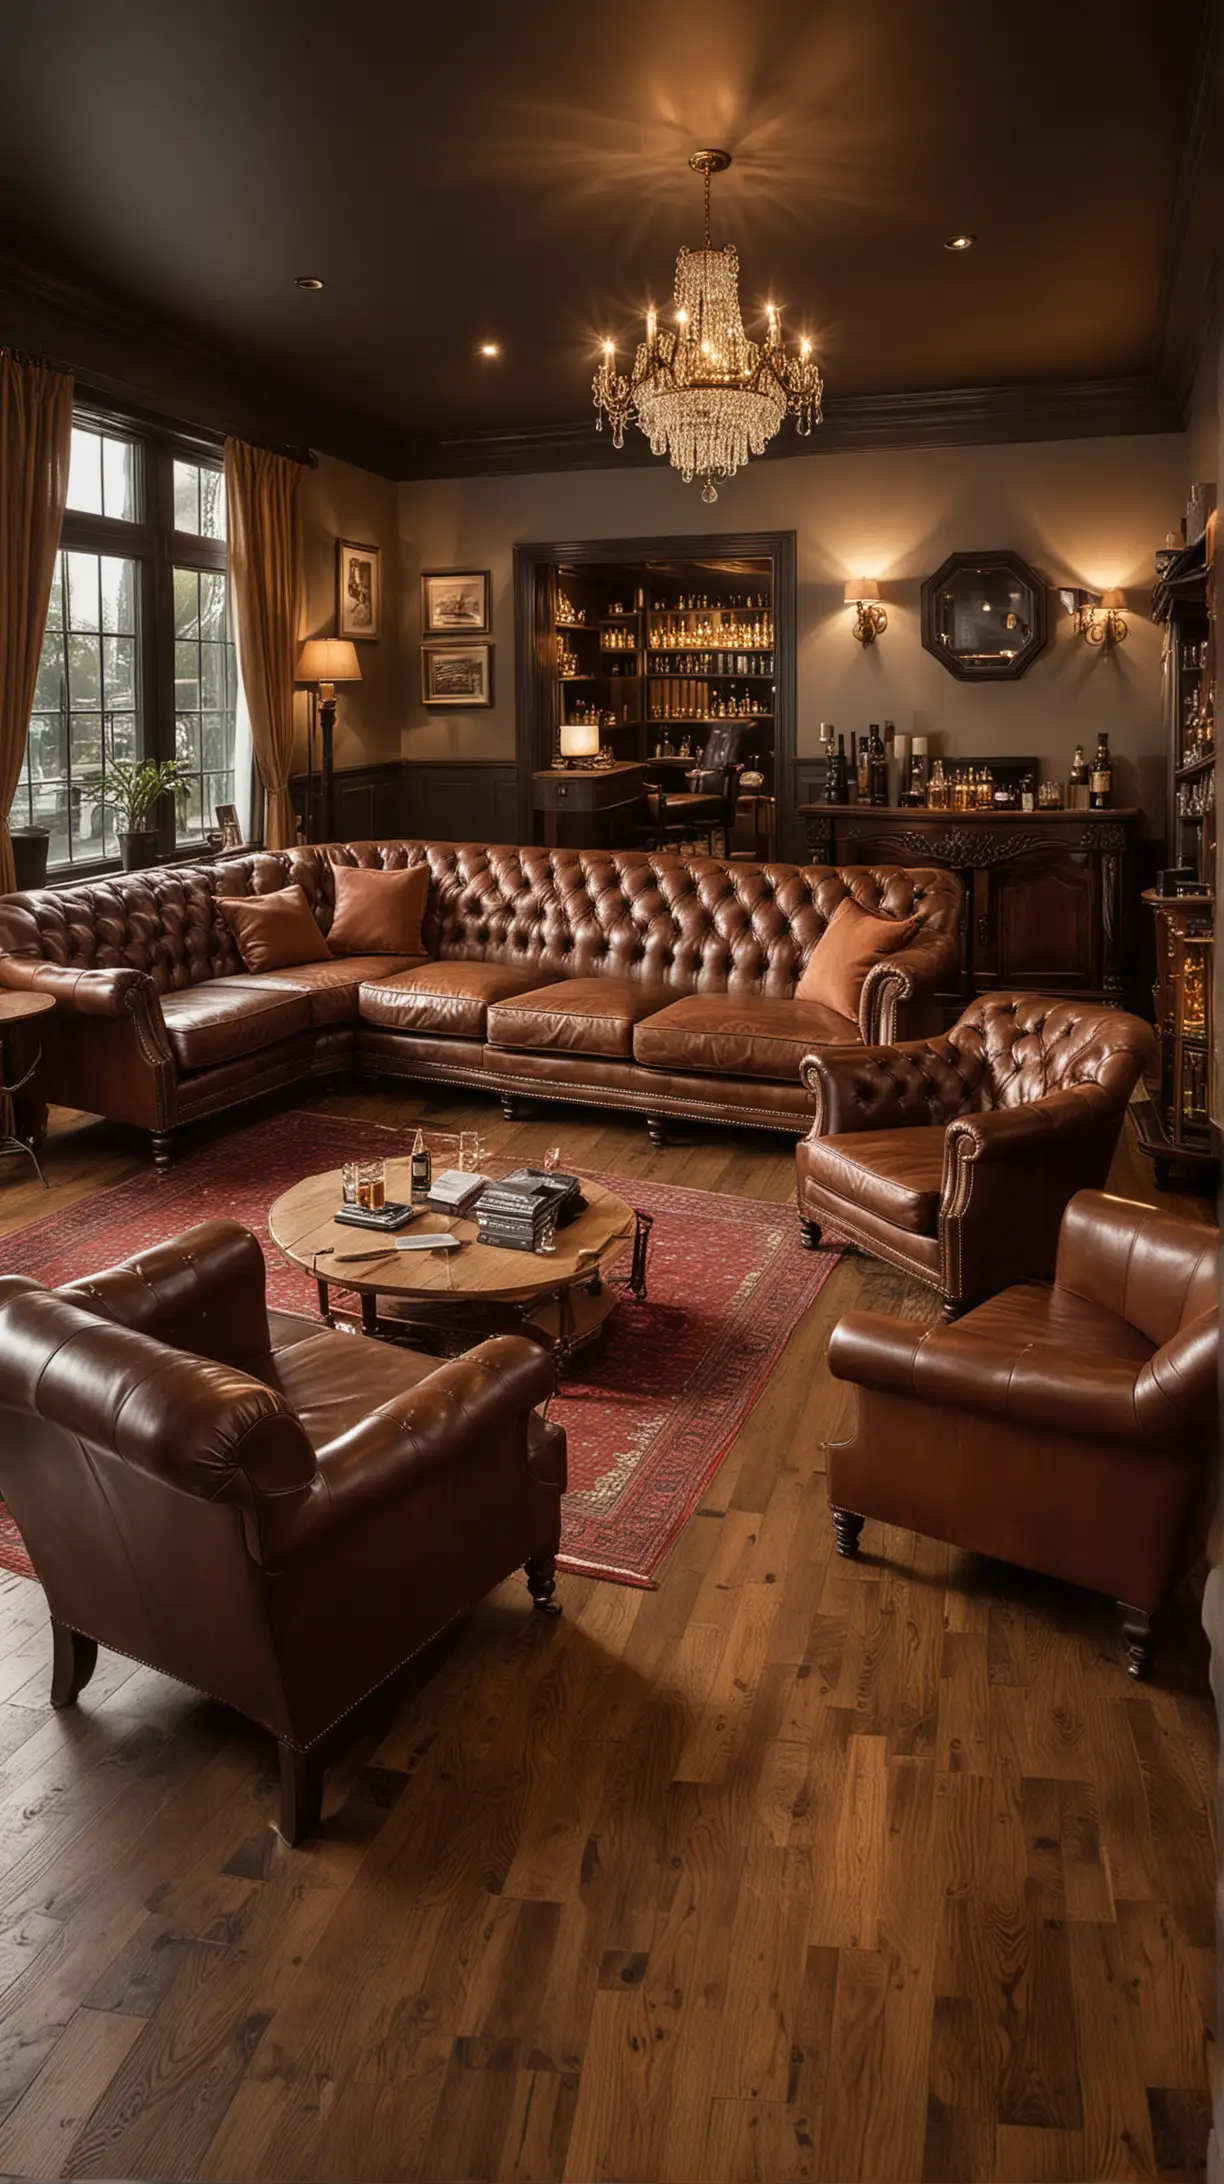 A luxurious whiskey lounge featuring classic dark leather armchairs and a matching sofa, with rich wooden floors and ambient lighting.